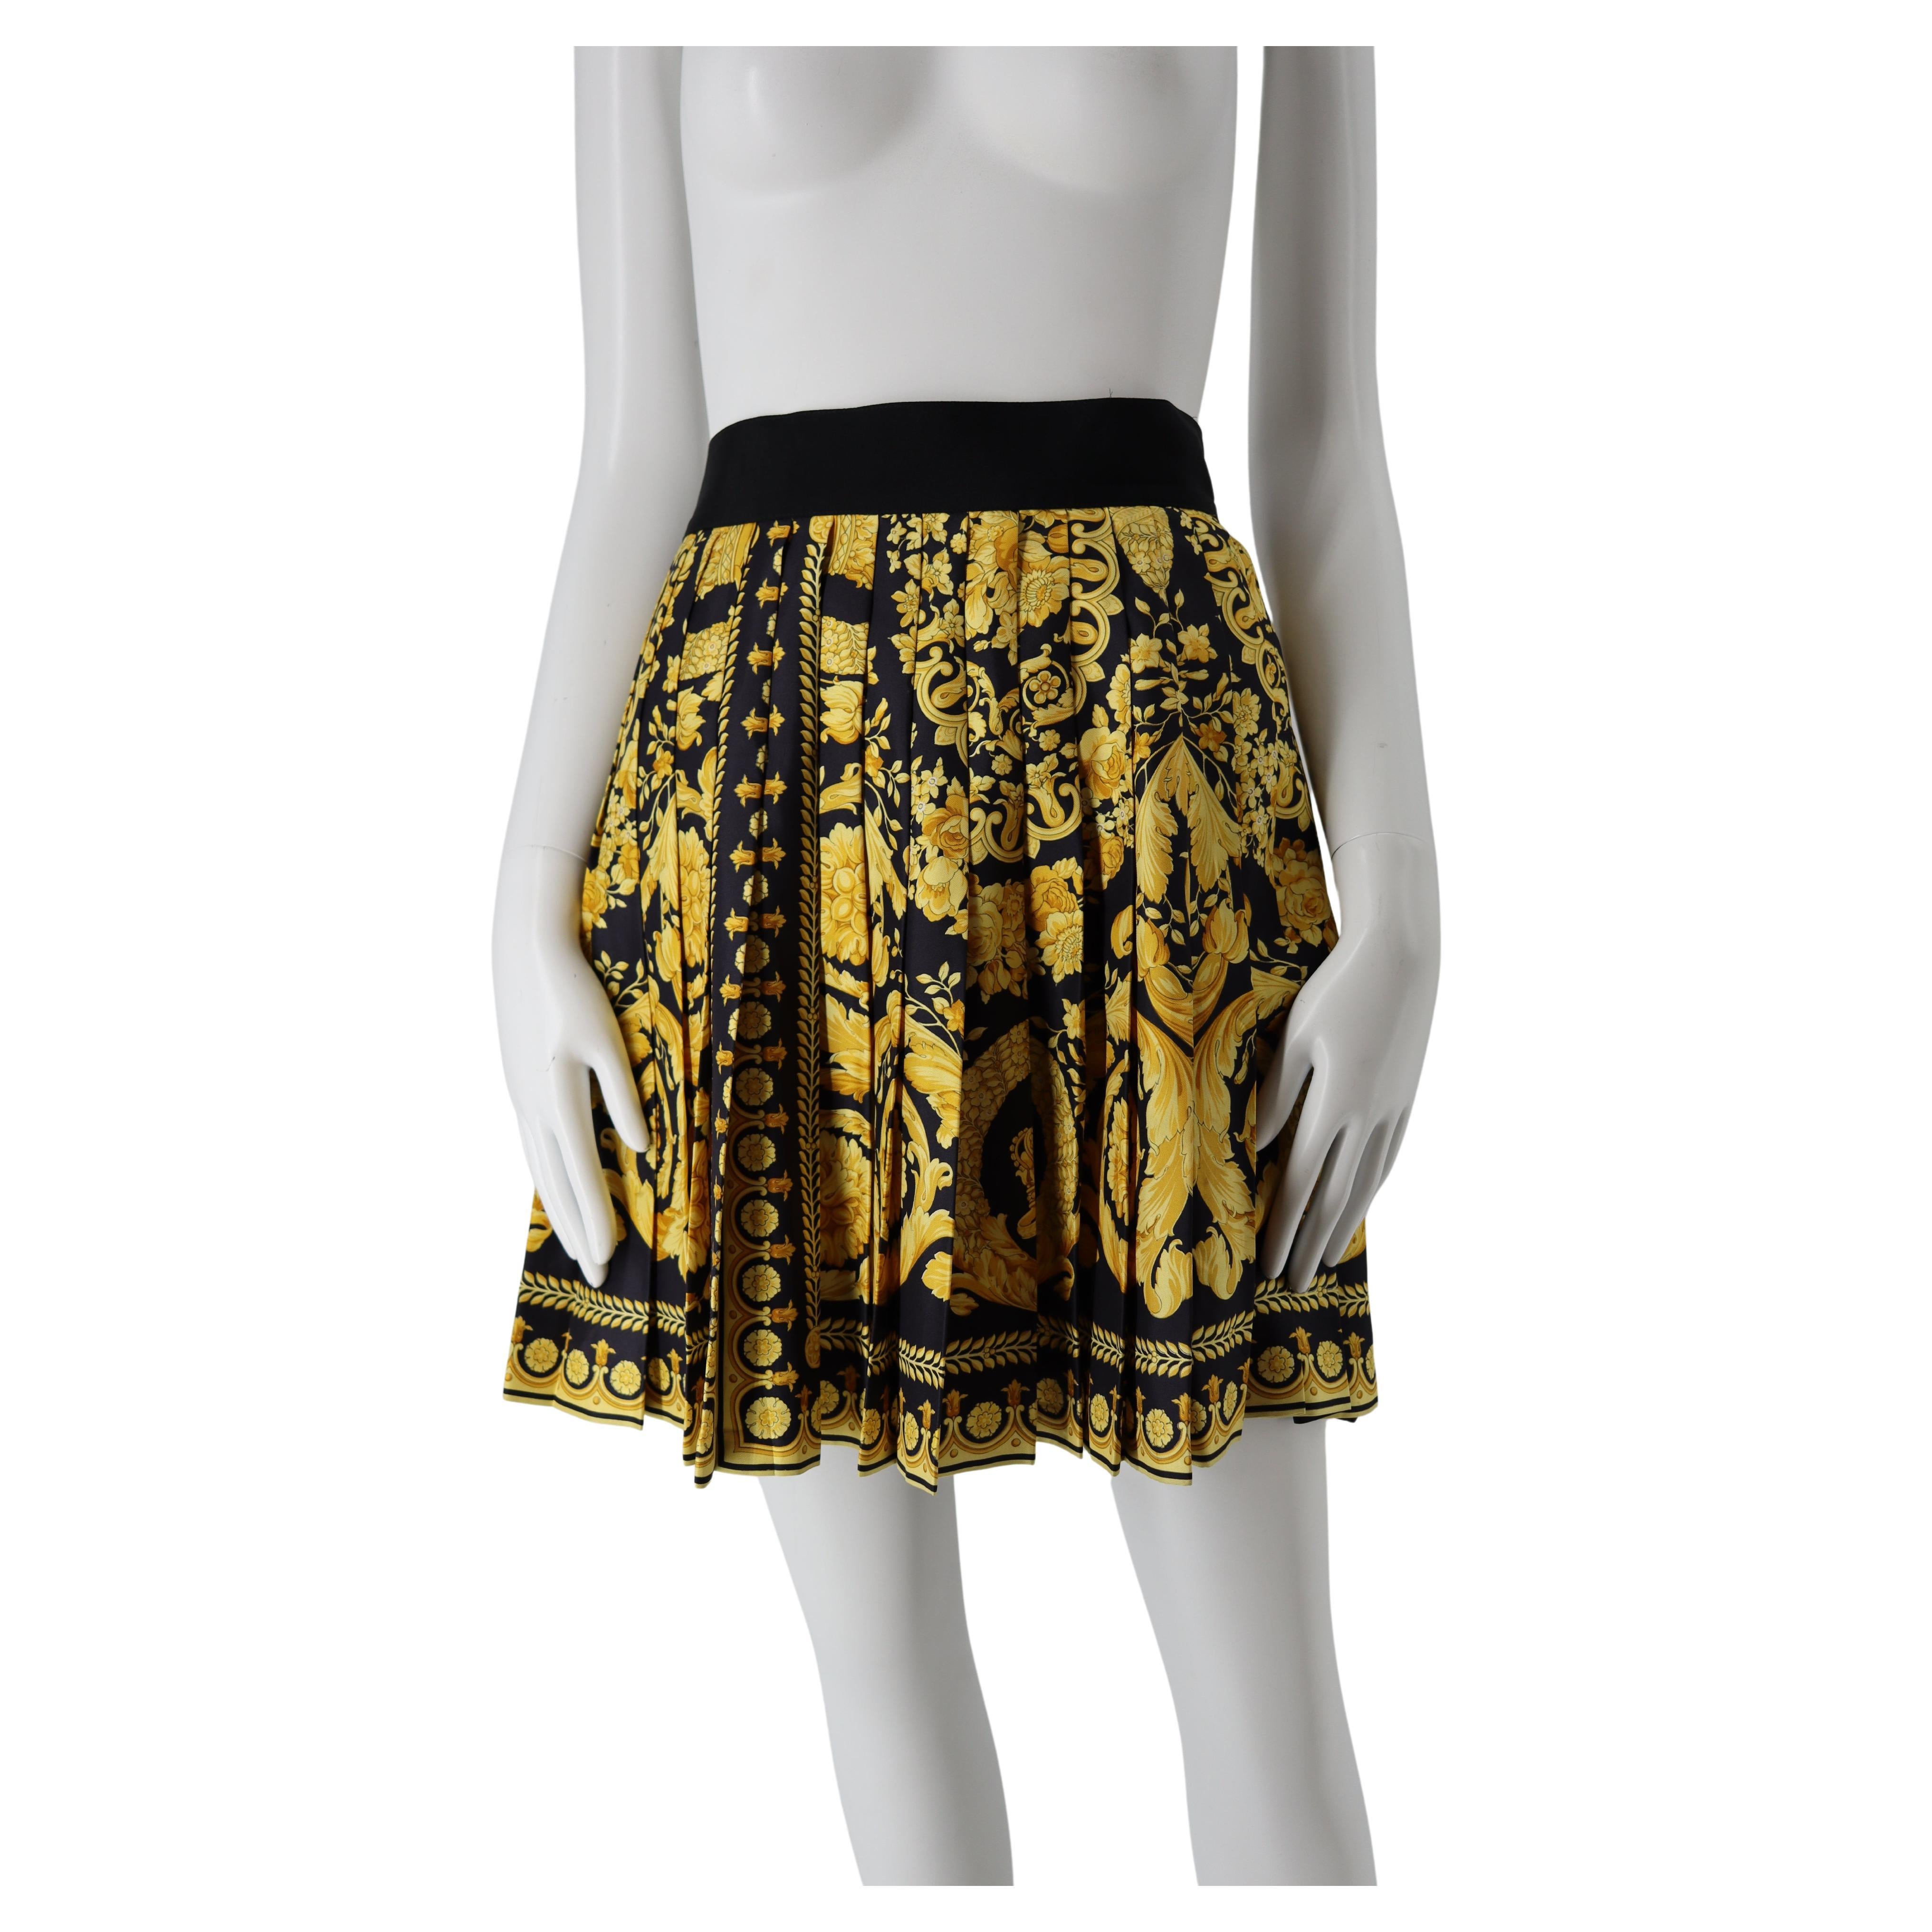 1991 Gianni Versace Couture Baroque Silk Skirt